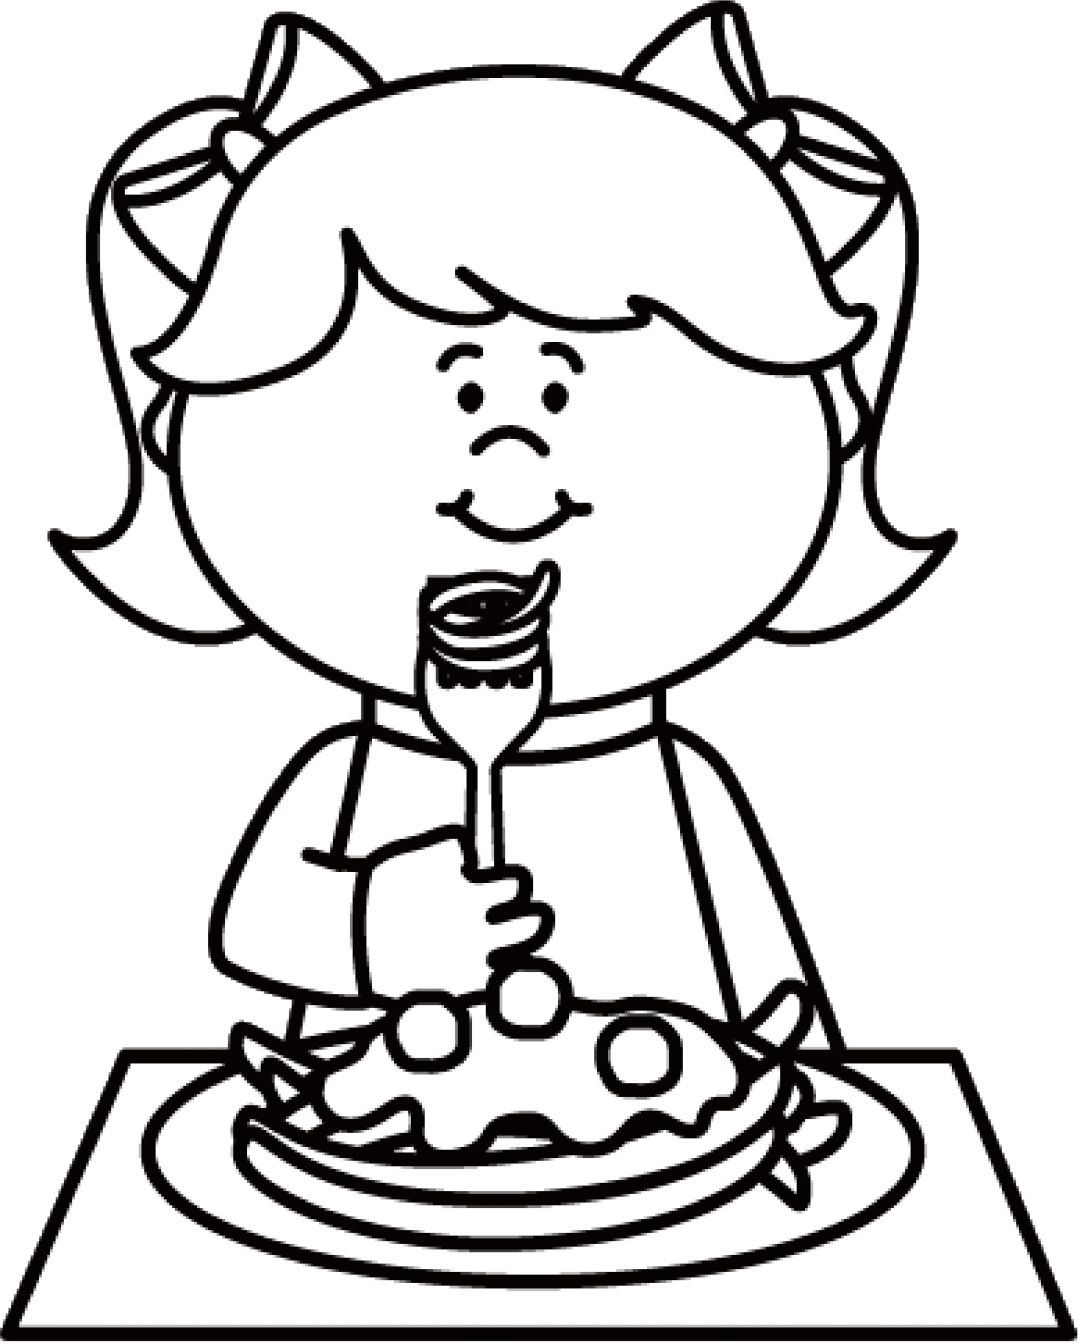 Eating Food Clip Art - Board Game Coloring Page (1080x1344)